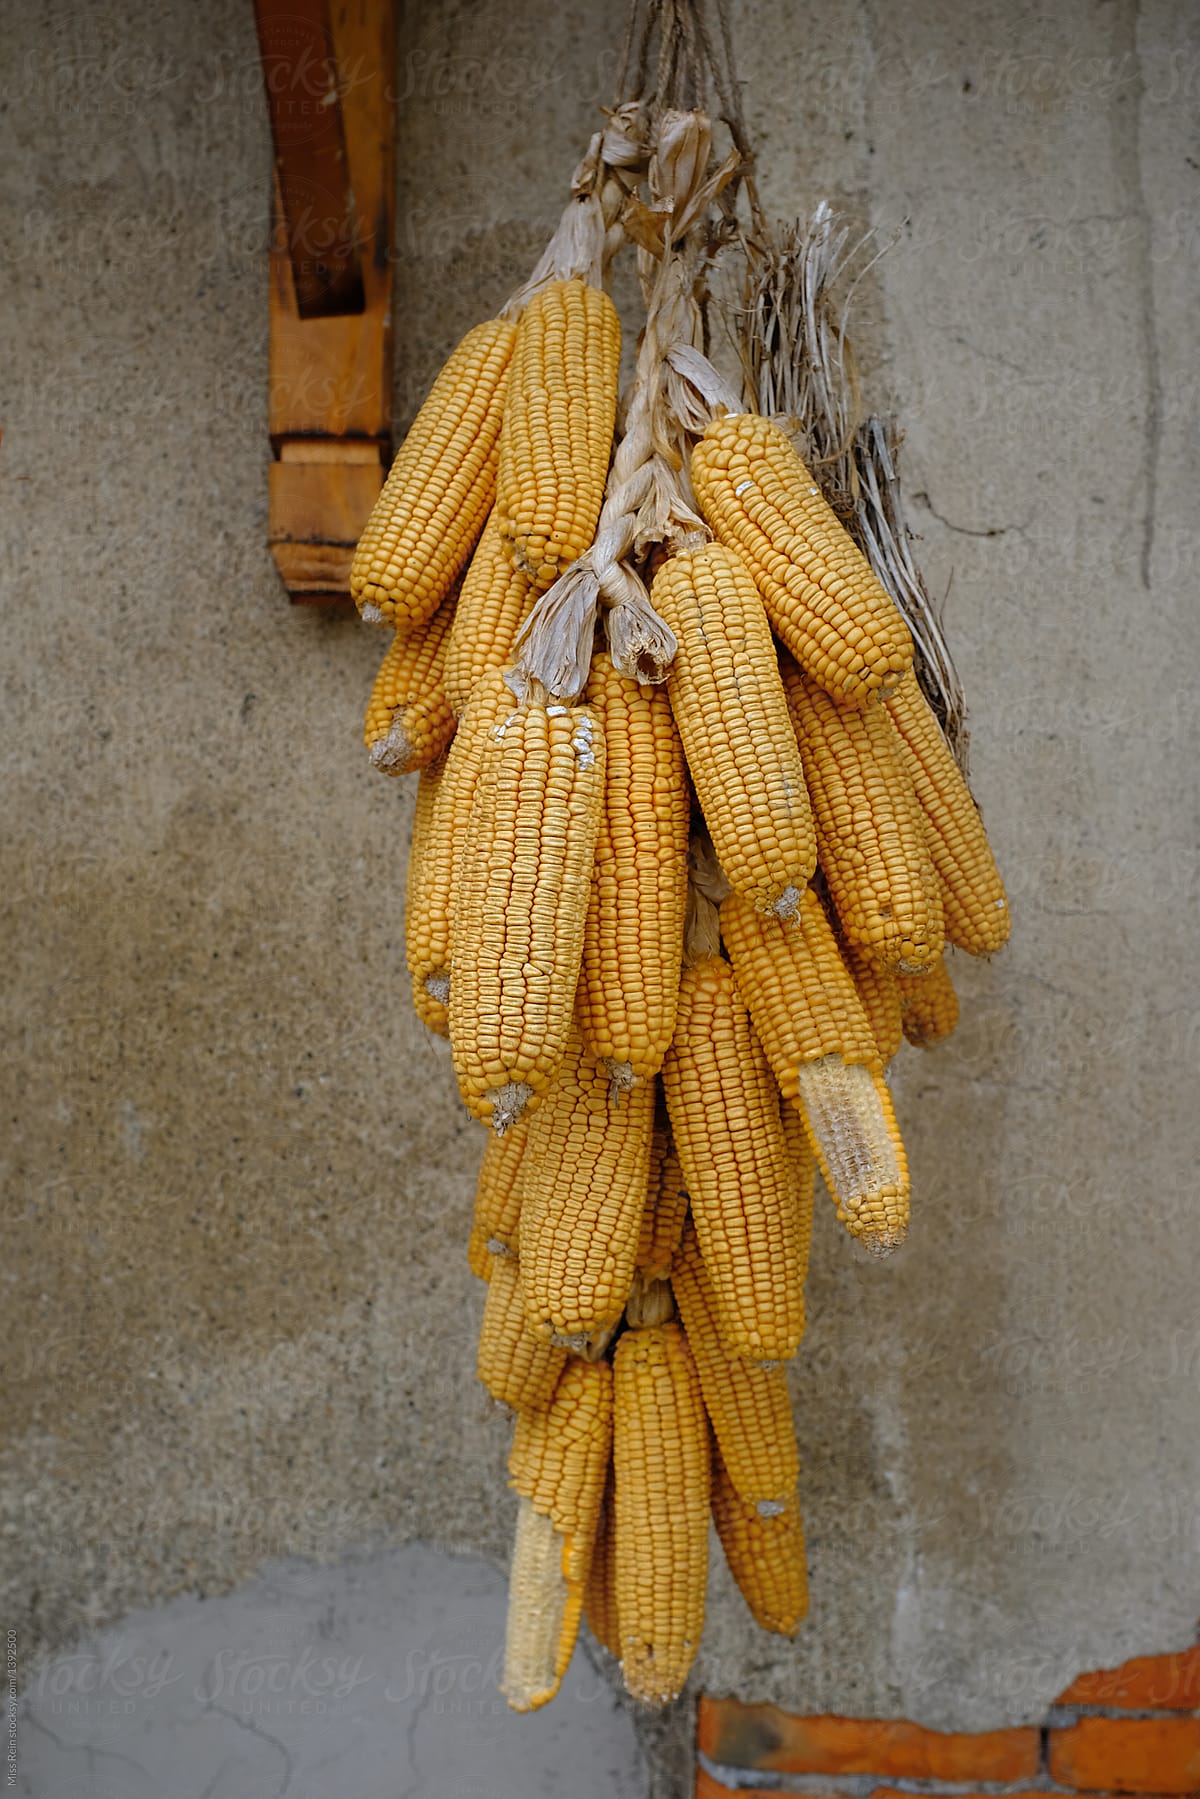 Dry hanging corn in the outdoors close-up